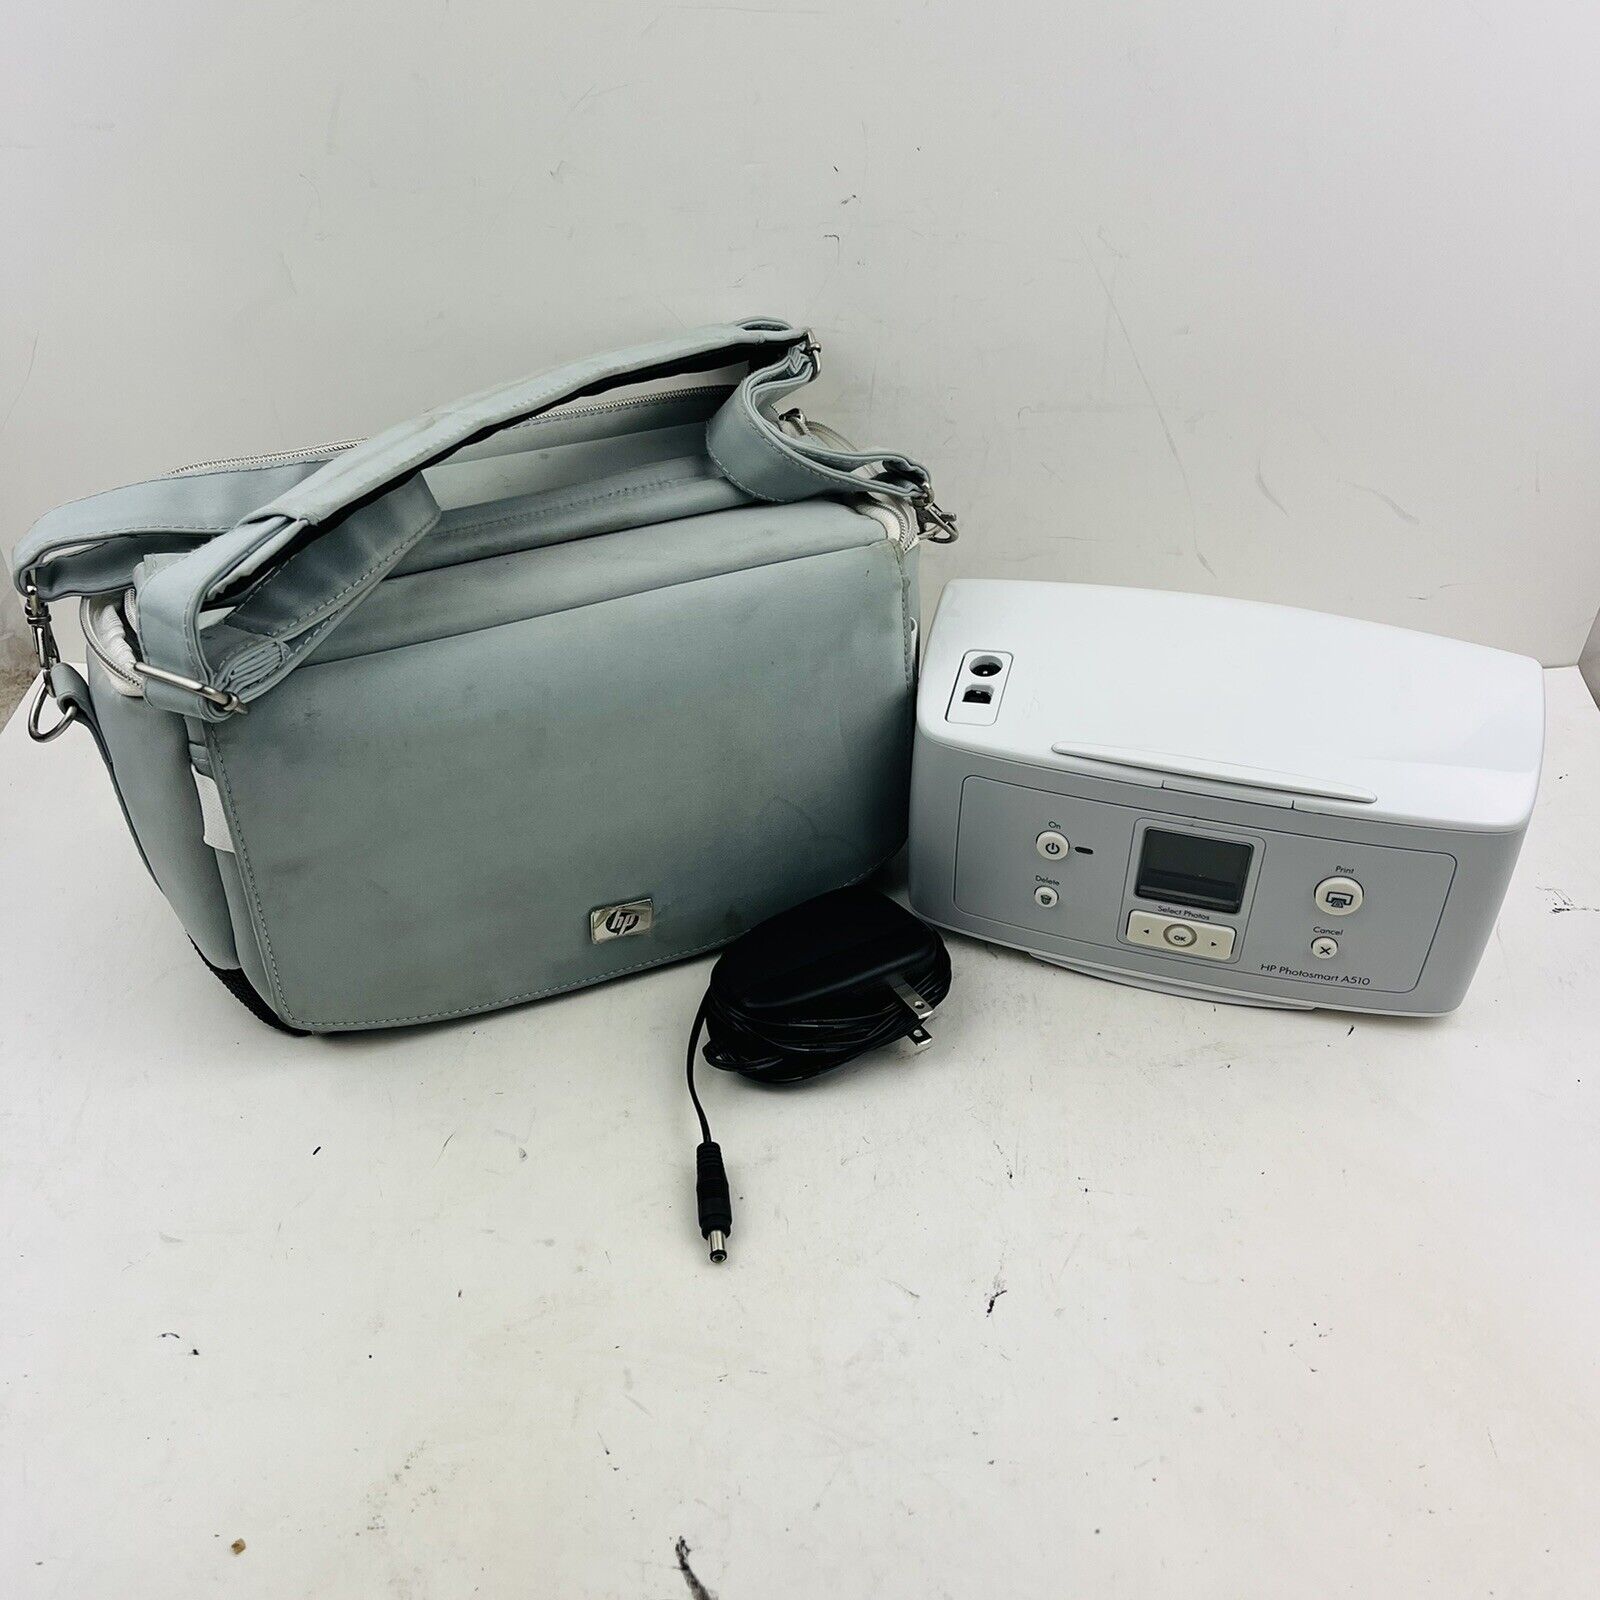 HP Photosmart A510 Q7024a Vivera Color Photo Printer With Carrying Case